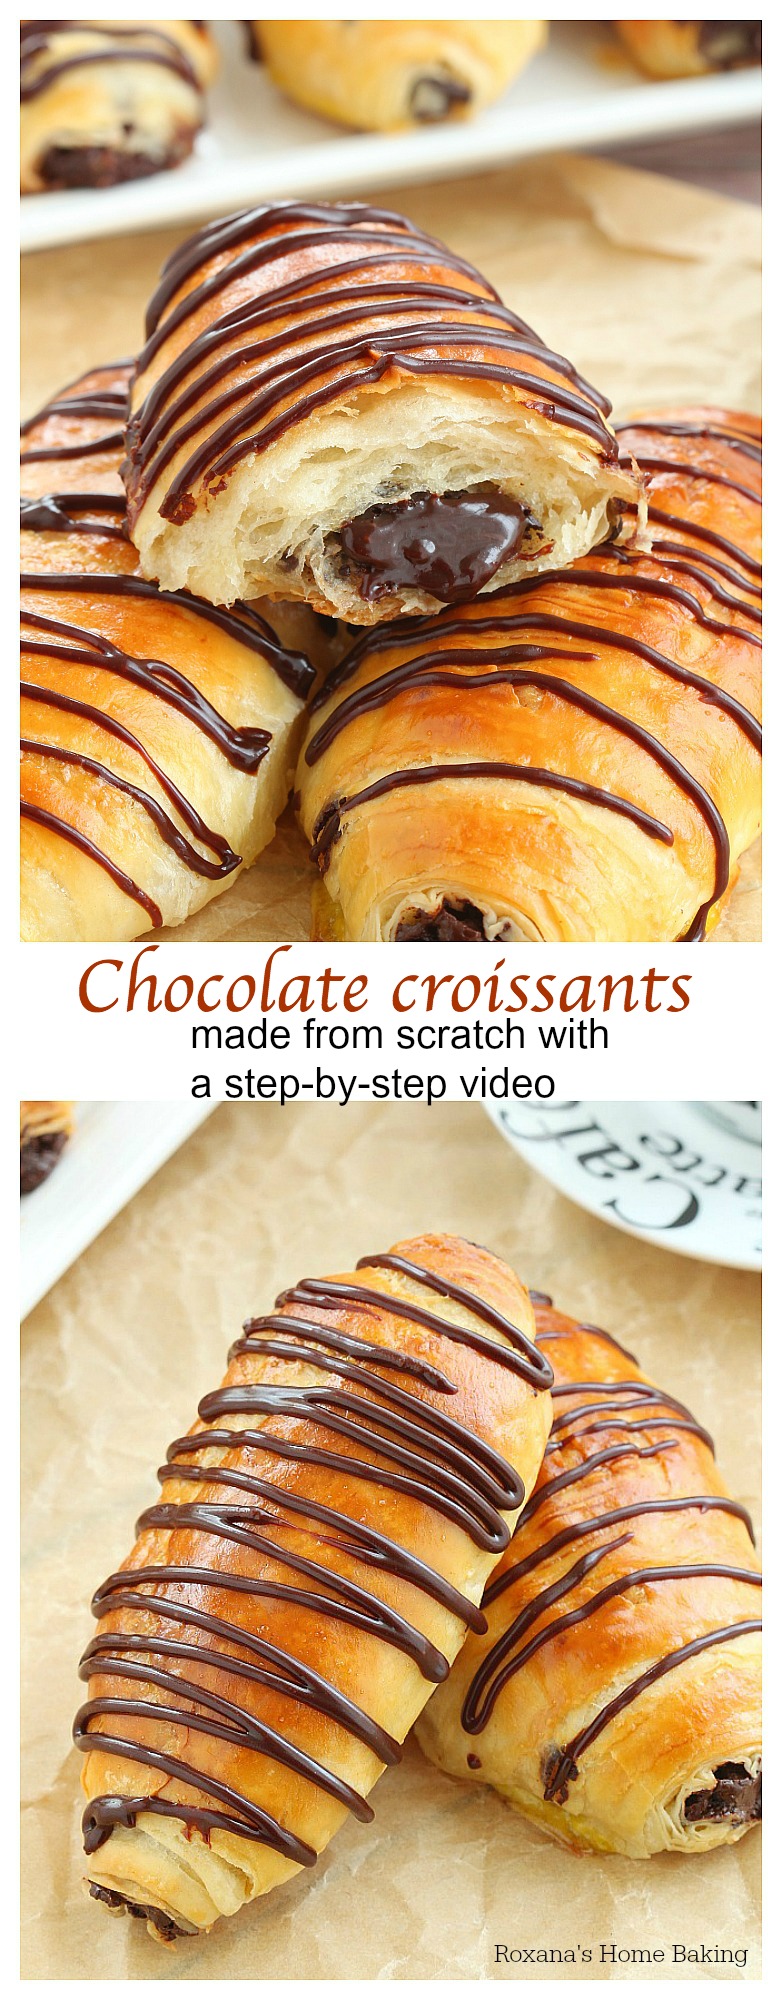 Layer upon layer of light, buttery flaky pastry filled with rich chocolate and drizzled with more chocolate, these made from scratch chocolate croissants are simply mind-blowing! No butter folding or chilling the dough several times needed!